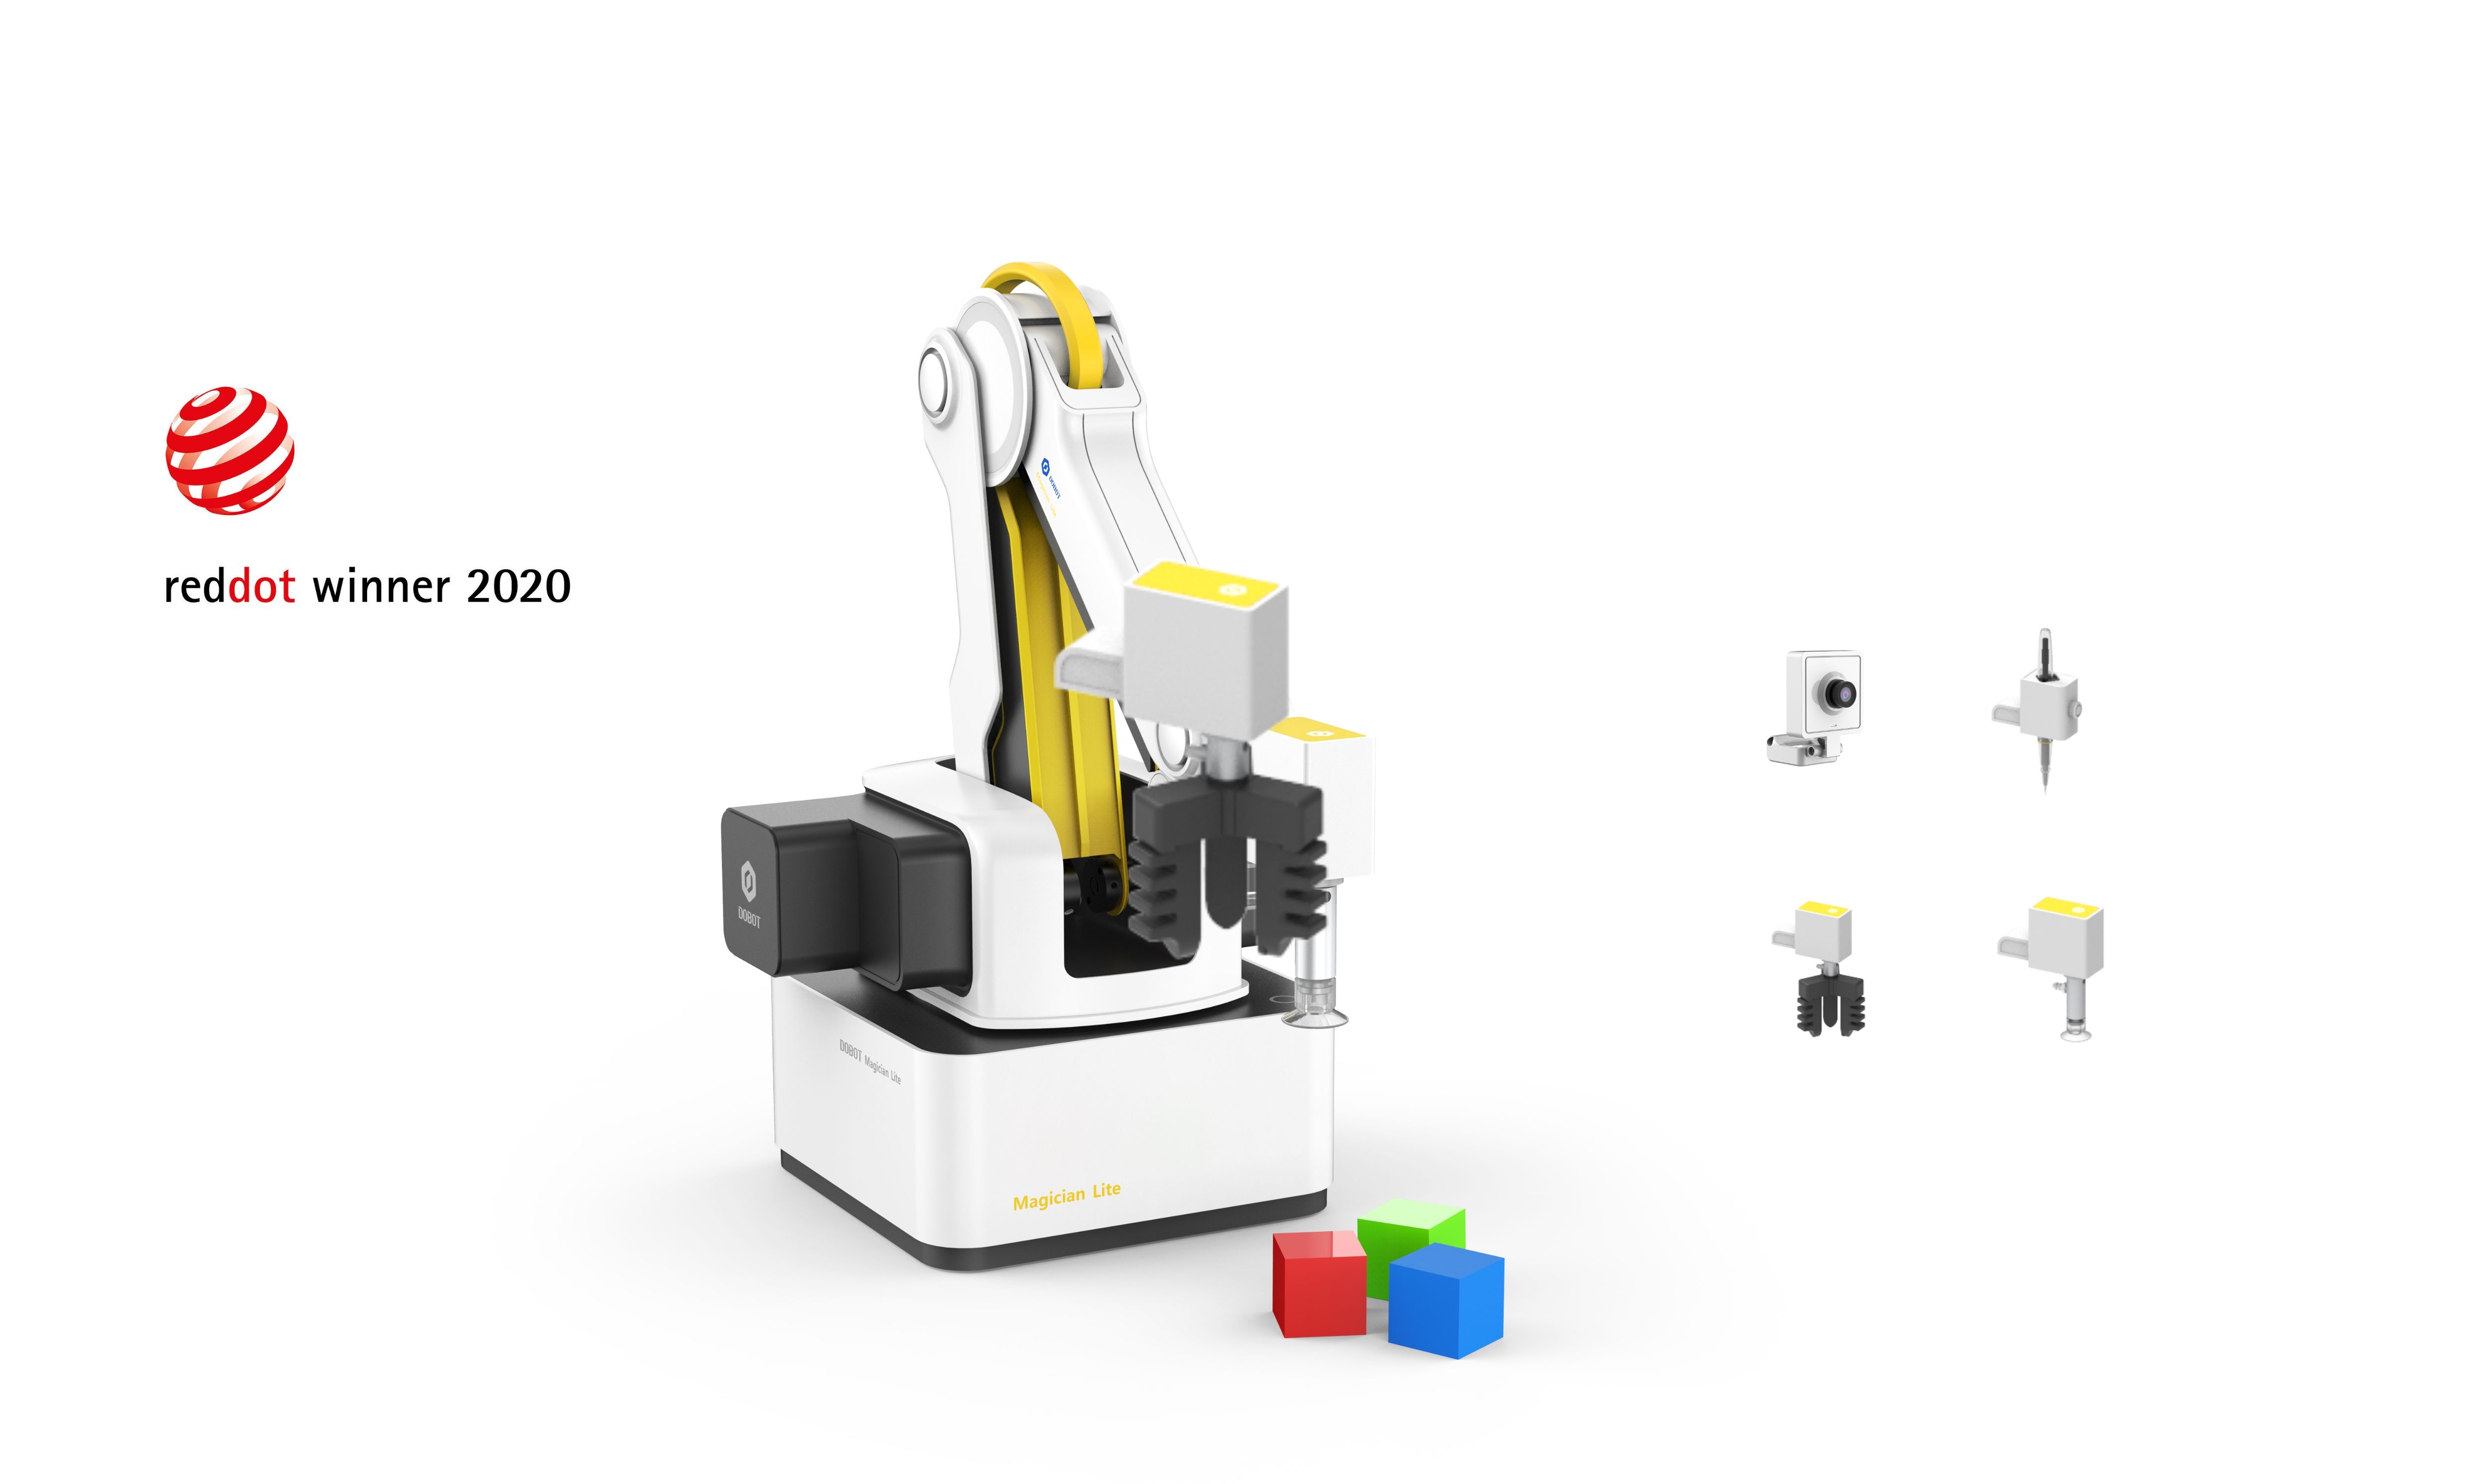 World’s First Kid-Friendly AI-Infused Robot Arm DOBOT Magician Lite Wins the Red Dot Awards 2020